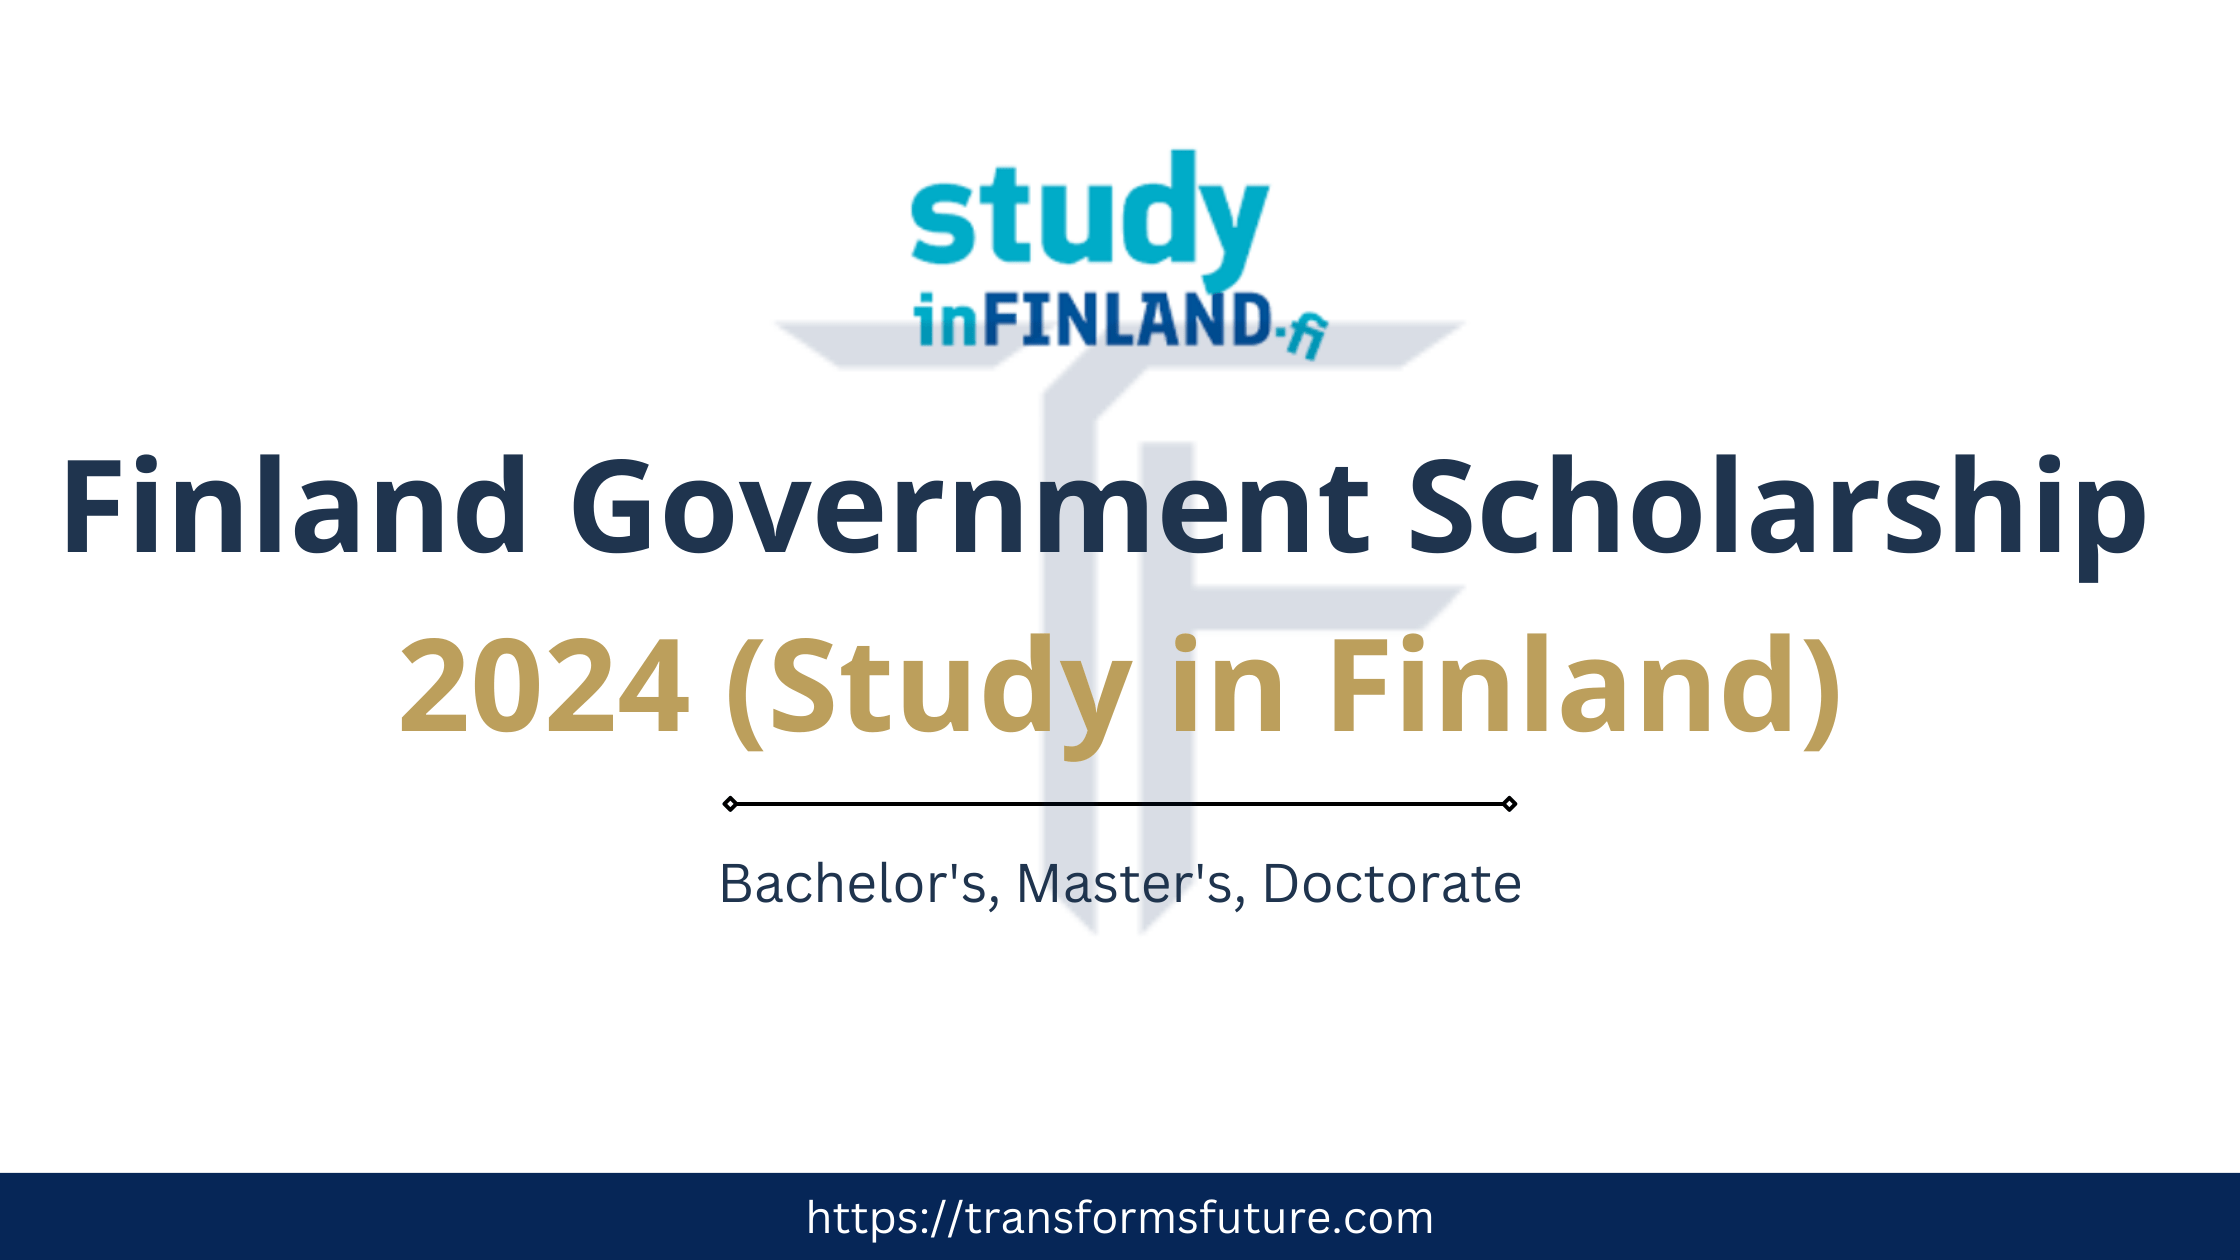 Finland Government Scholarship 2024 (Study in Finland)